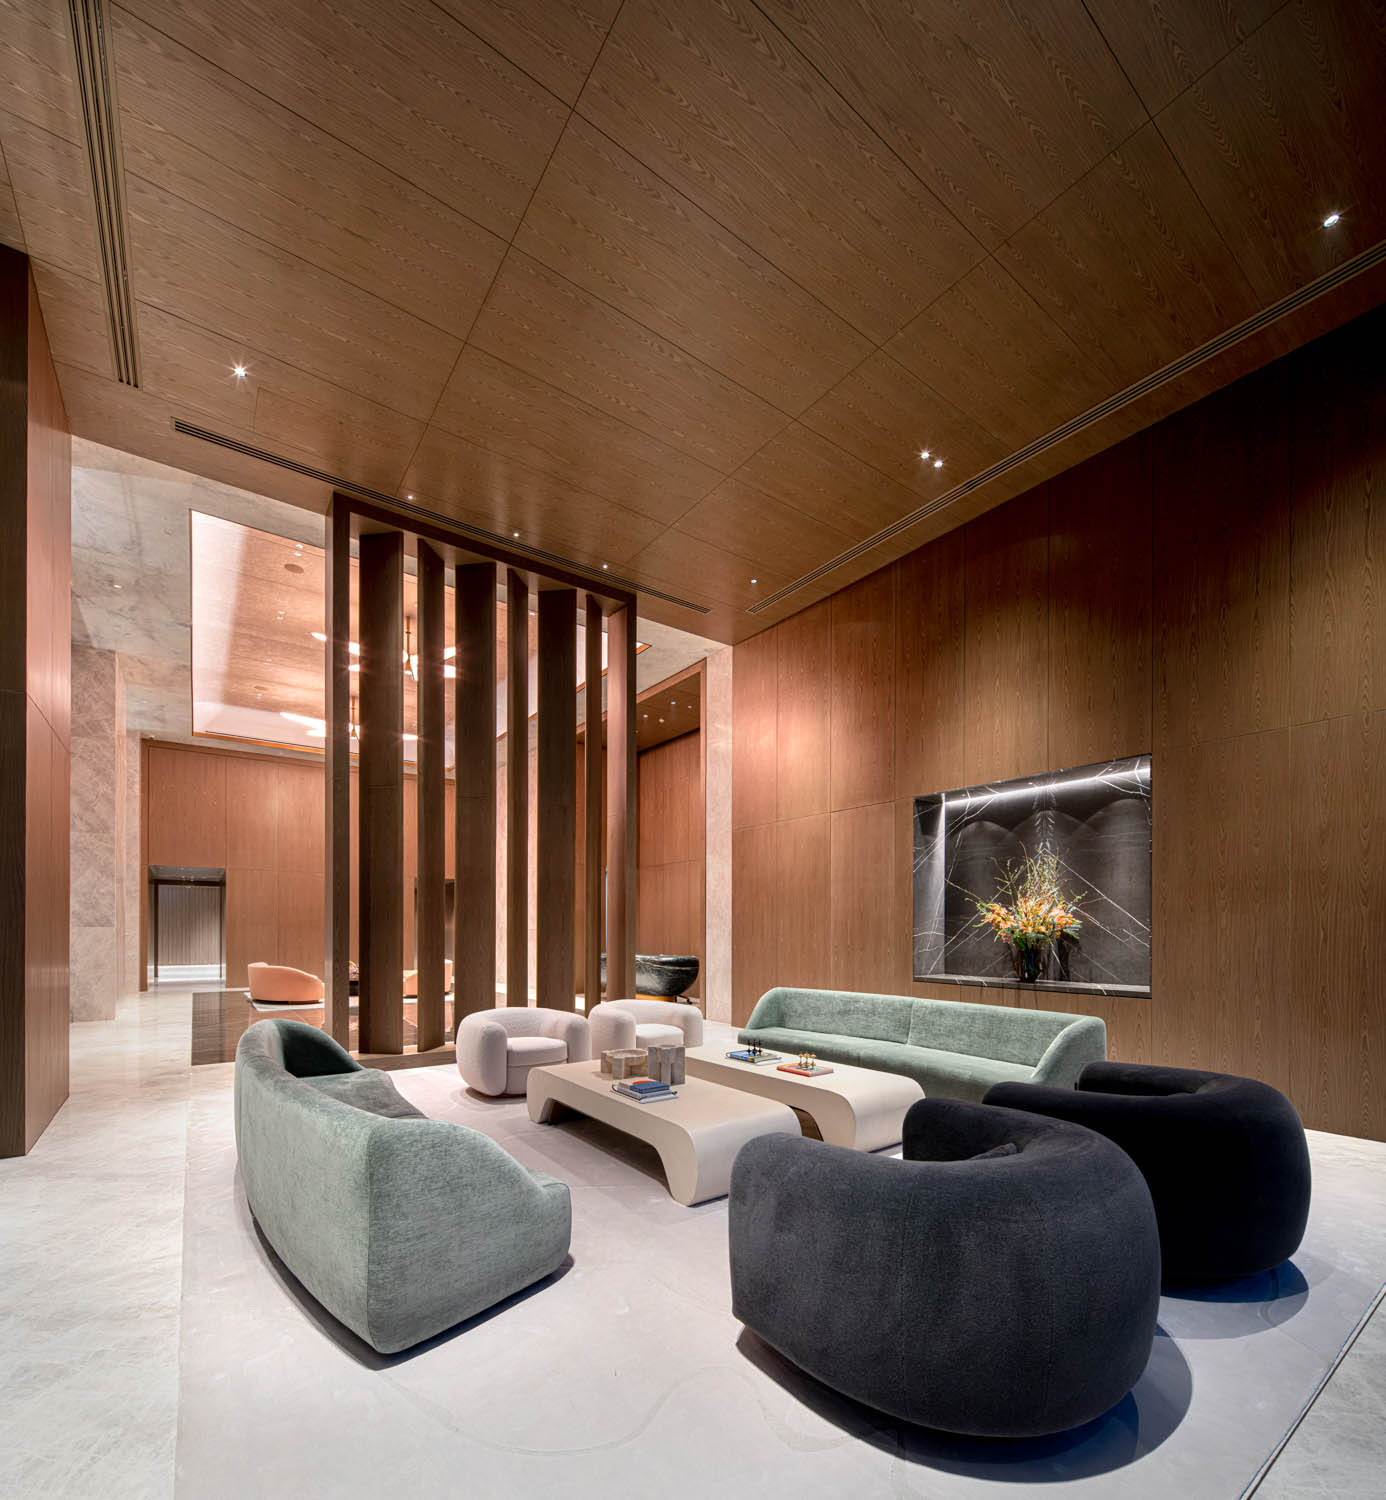 Grand lobby with earth tone material